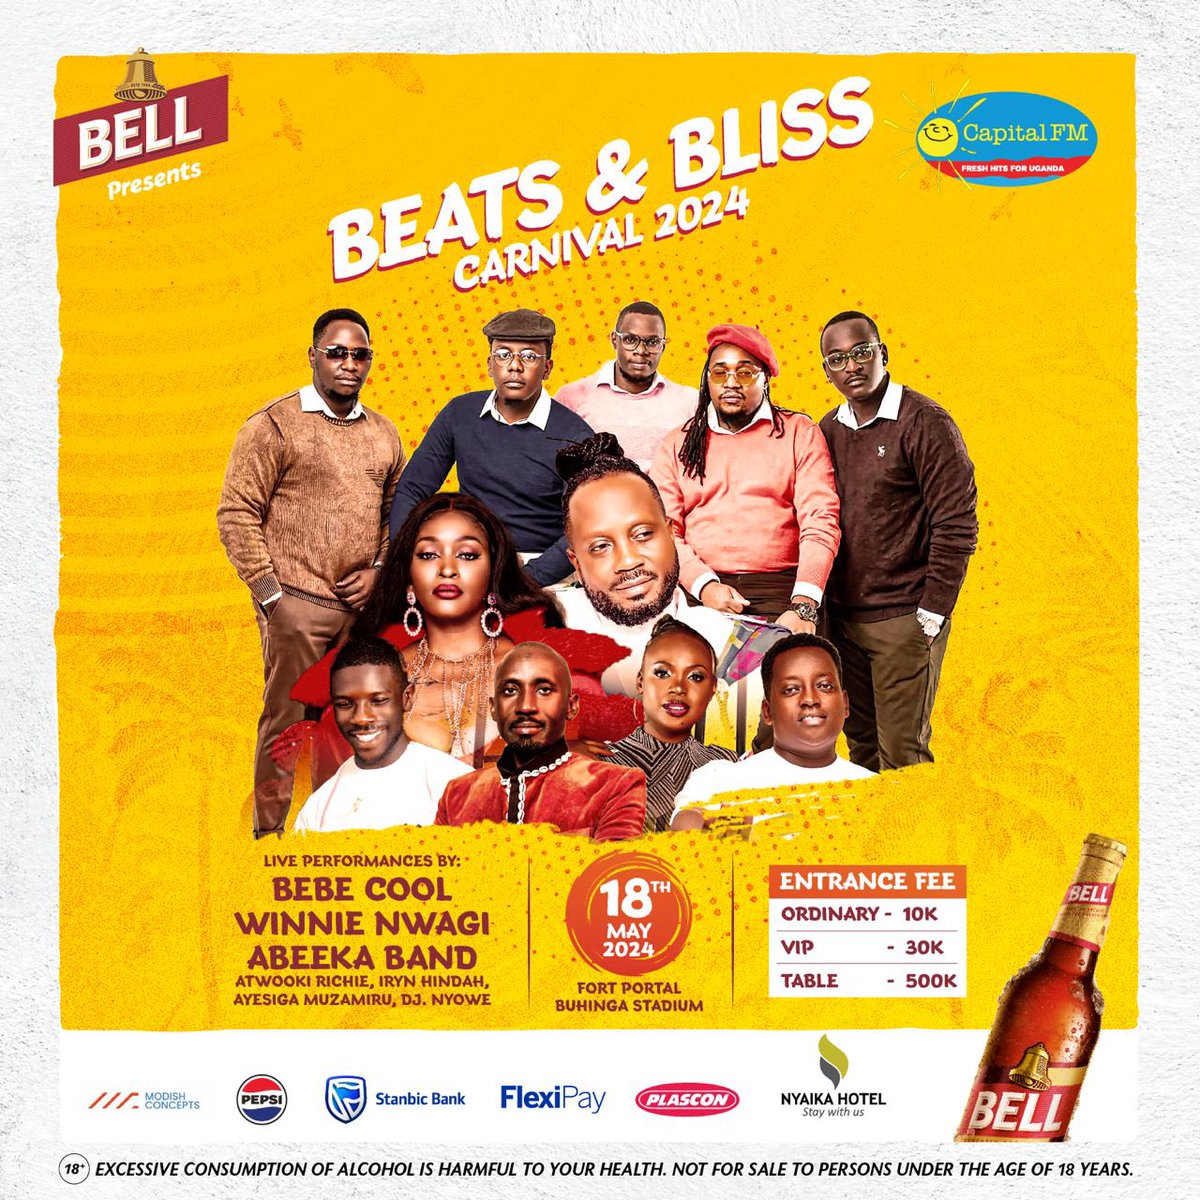 Get ready to groove at the Fortportal City Beat and Bliss Carnival on May 18th! 🎉🎶 Join Bebe Cool, Nwagi, Abeeka Band, Ayesiga Muzamiru, and your favorite @DjNyowe for an unforgettable celebration of culture & music. #FortportalCarnival #MusicFest #SaveTheDate @Bell_Lager